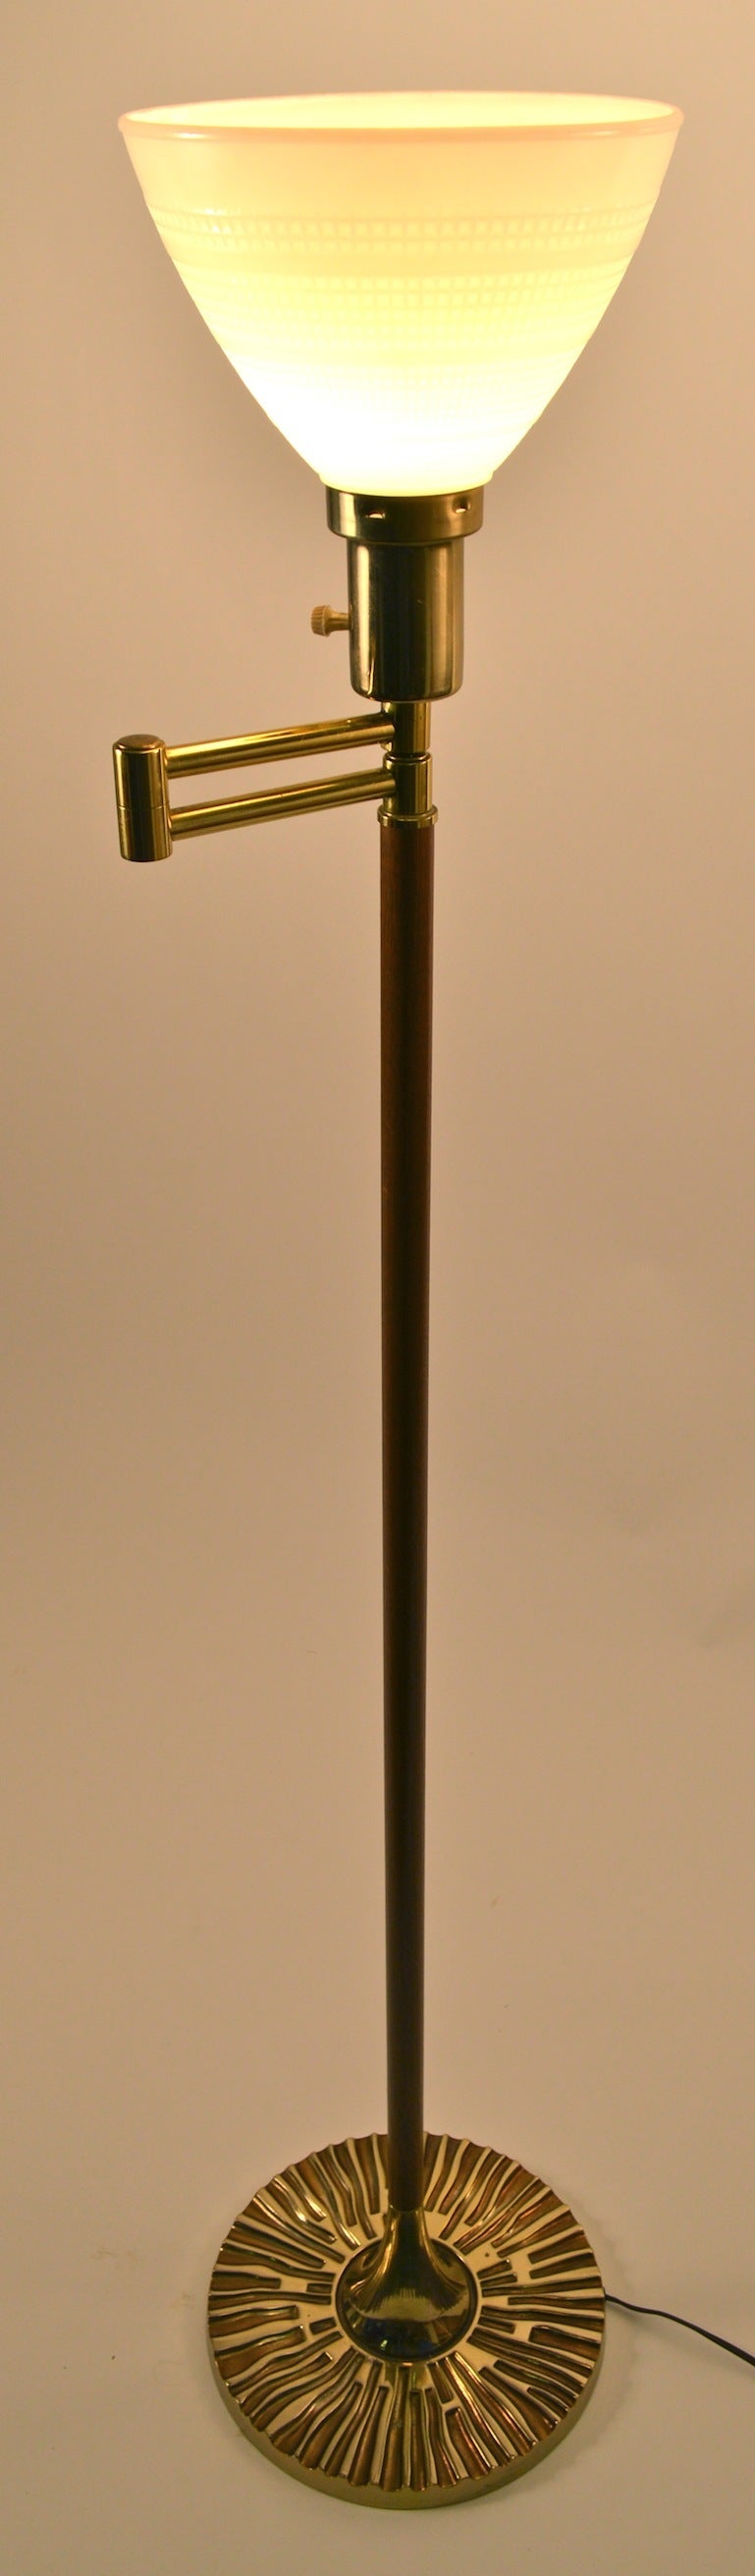 Cast Brutalist gold tone base, wood vertical standard, with brass jointed swing arm top. Can be used with or without shade, as shown.